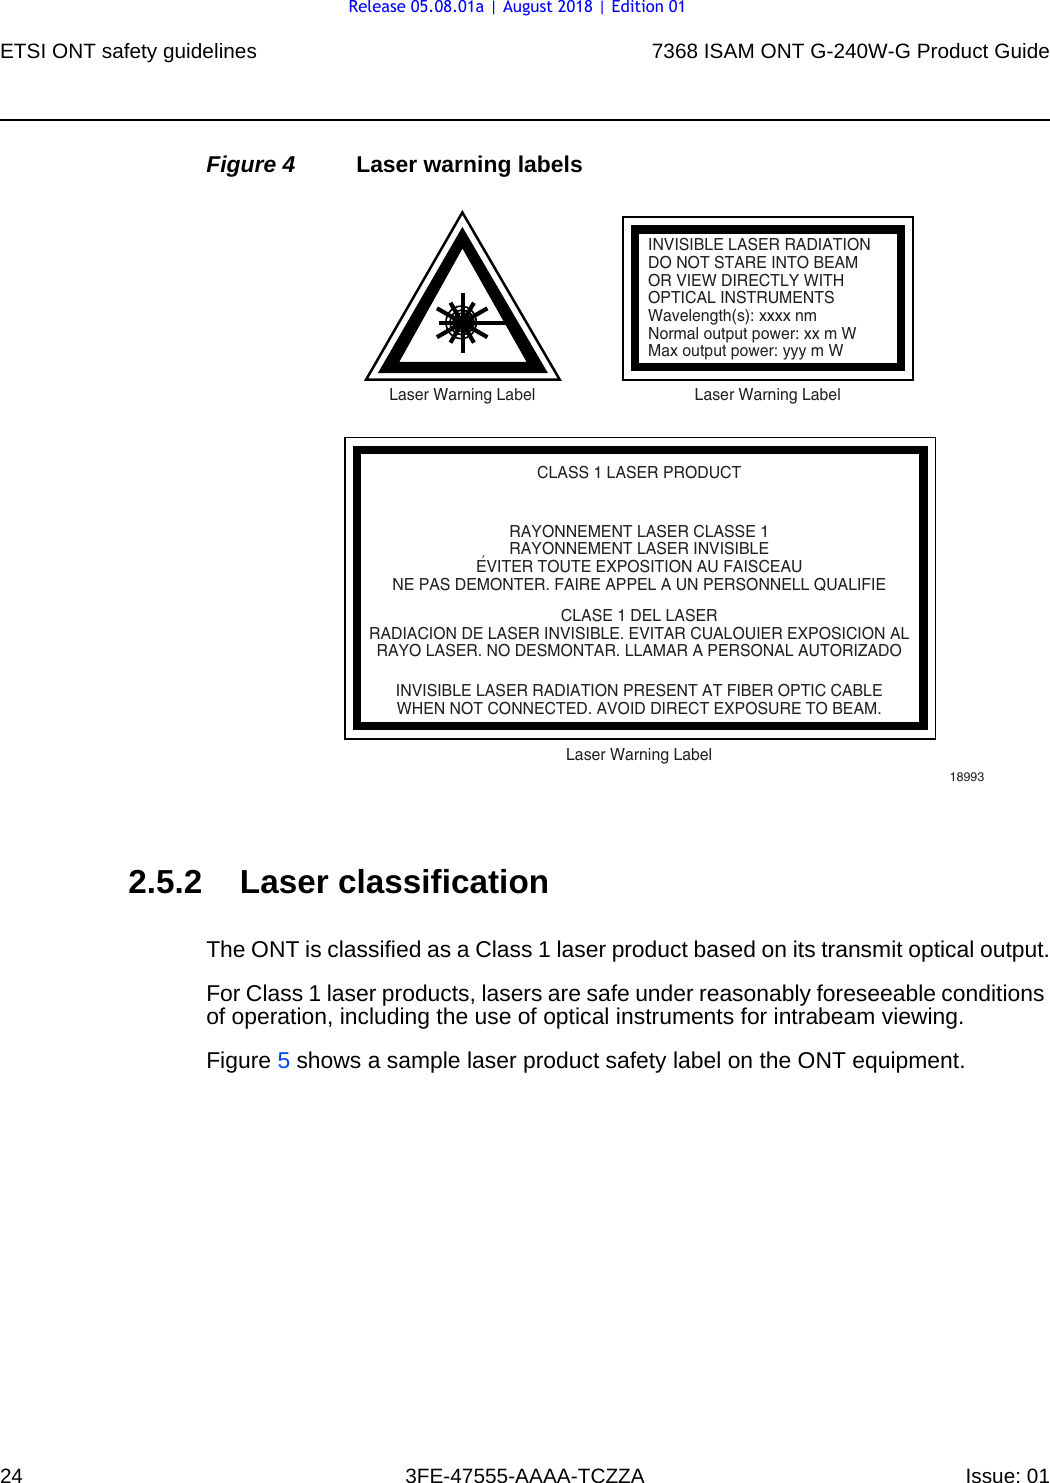 ETSI ONT safety guidelines247368 ISAM ONT G-240W-G Product Guide3FE-47555-AAAA-TCZZA Issue: 01 Figure 4 Laser warning labels2.5.2 Laser classificationThe ONT is classified as a Class 1 laser product based on its transmit optical output.For Class 1 laser products, lasers are safe under reasonably foreseeable conditions of operation, including the use of optical instruments for intrabeam viewing.Figure 5 shows a sample laser product safety label on the ONT equipment.INVISIBLE LASER RADIATIONDO NOT STARE INTO BEAMOR VIEW DIRECTLY WITHOPTICAL INSTRUMENTSWavelength(s): xxxx nmNormal output power: xx m WMax output power: yyy m WLaser Warning Label Laser Warning LabelCLASS 1 LASER PRODUCTINVISIBLE LASER RADIATION PRESENT AT FIBER OPTIC CABLEWHEN NOT CONNECTED. AVOID DIRECT EXPOSURE TO BEAM.RAYONNEMENT LASER CLASSE 1RAYONNEMENT LASER INVISIBLEEVITER TOUTE EXPOSITION AU FAISCEAUNE PAS DEMONTER. FAIRE APPEL A UN PERSONNELL QUALIFIECLASE 1 DEL LASERRADIACION DE LASER INVISIBLE. EVITAR CUALOUIER EXPOSICION ALRAYO LASER. NO DESMONTAR. LLAMAR A PERSONAL AUTORIZADOLaser Warning Label18993&apos;Release 05.08.01a | August 2018 | Edition 01